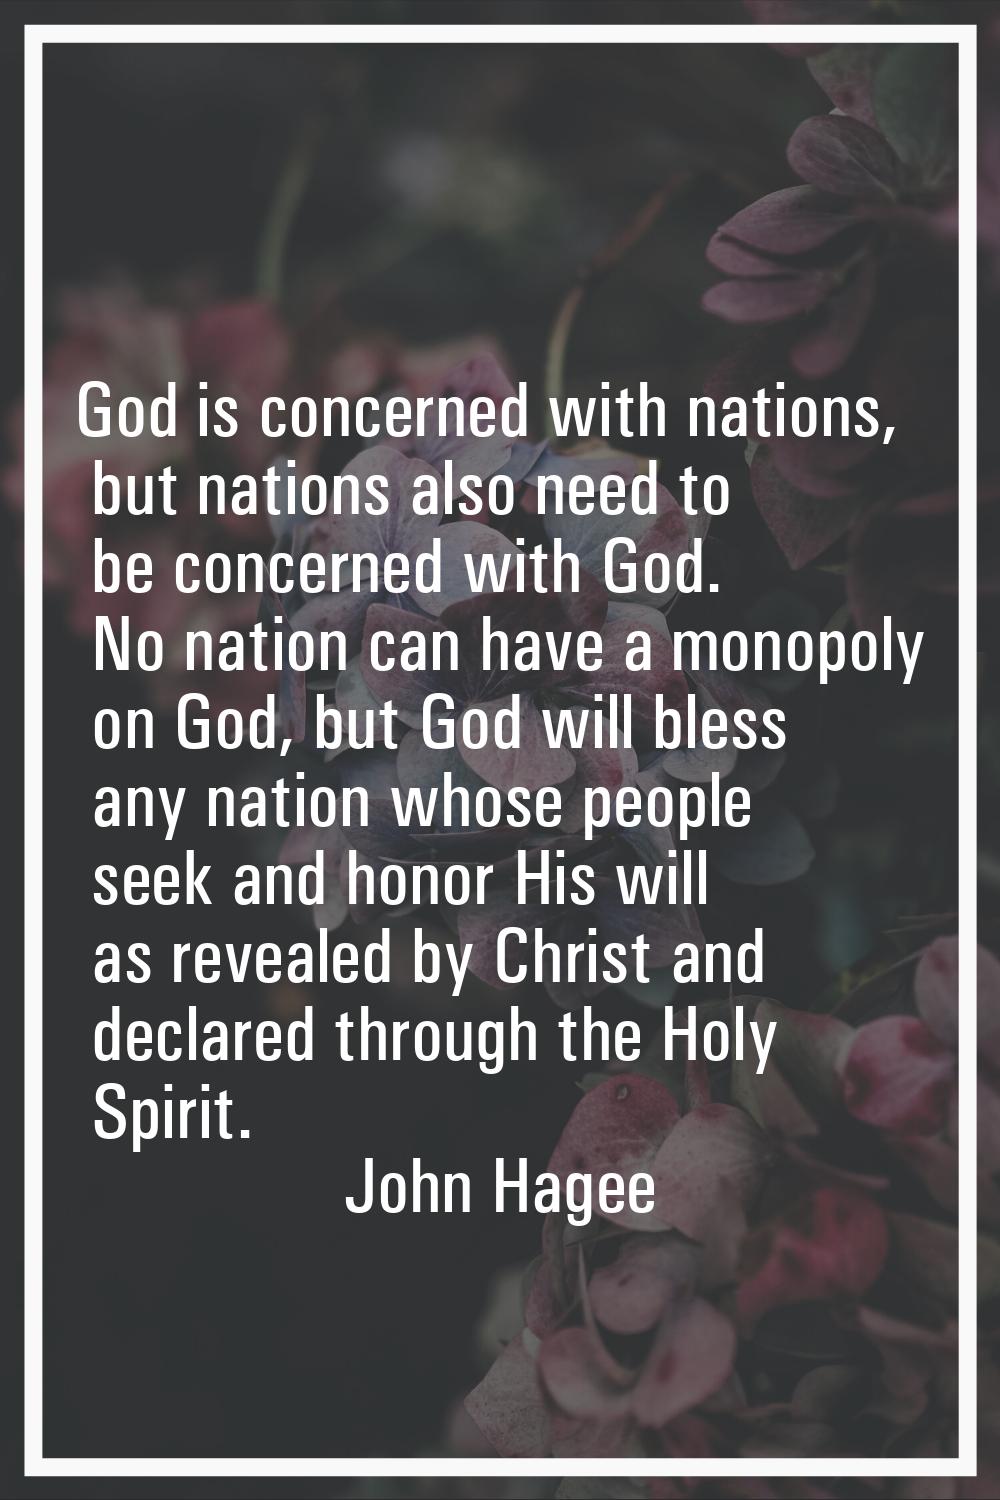 God is concerned with nations, but nations also need to be concerned with God. No nation can have a